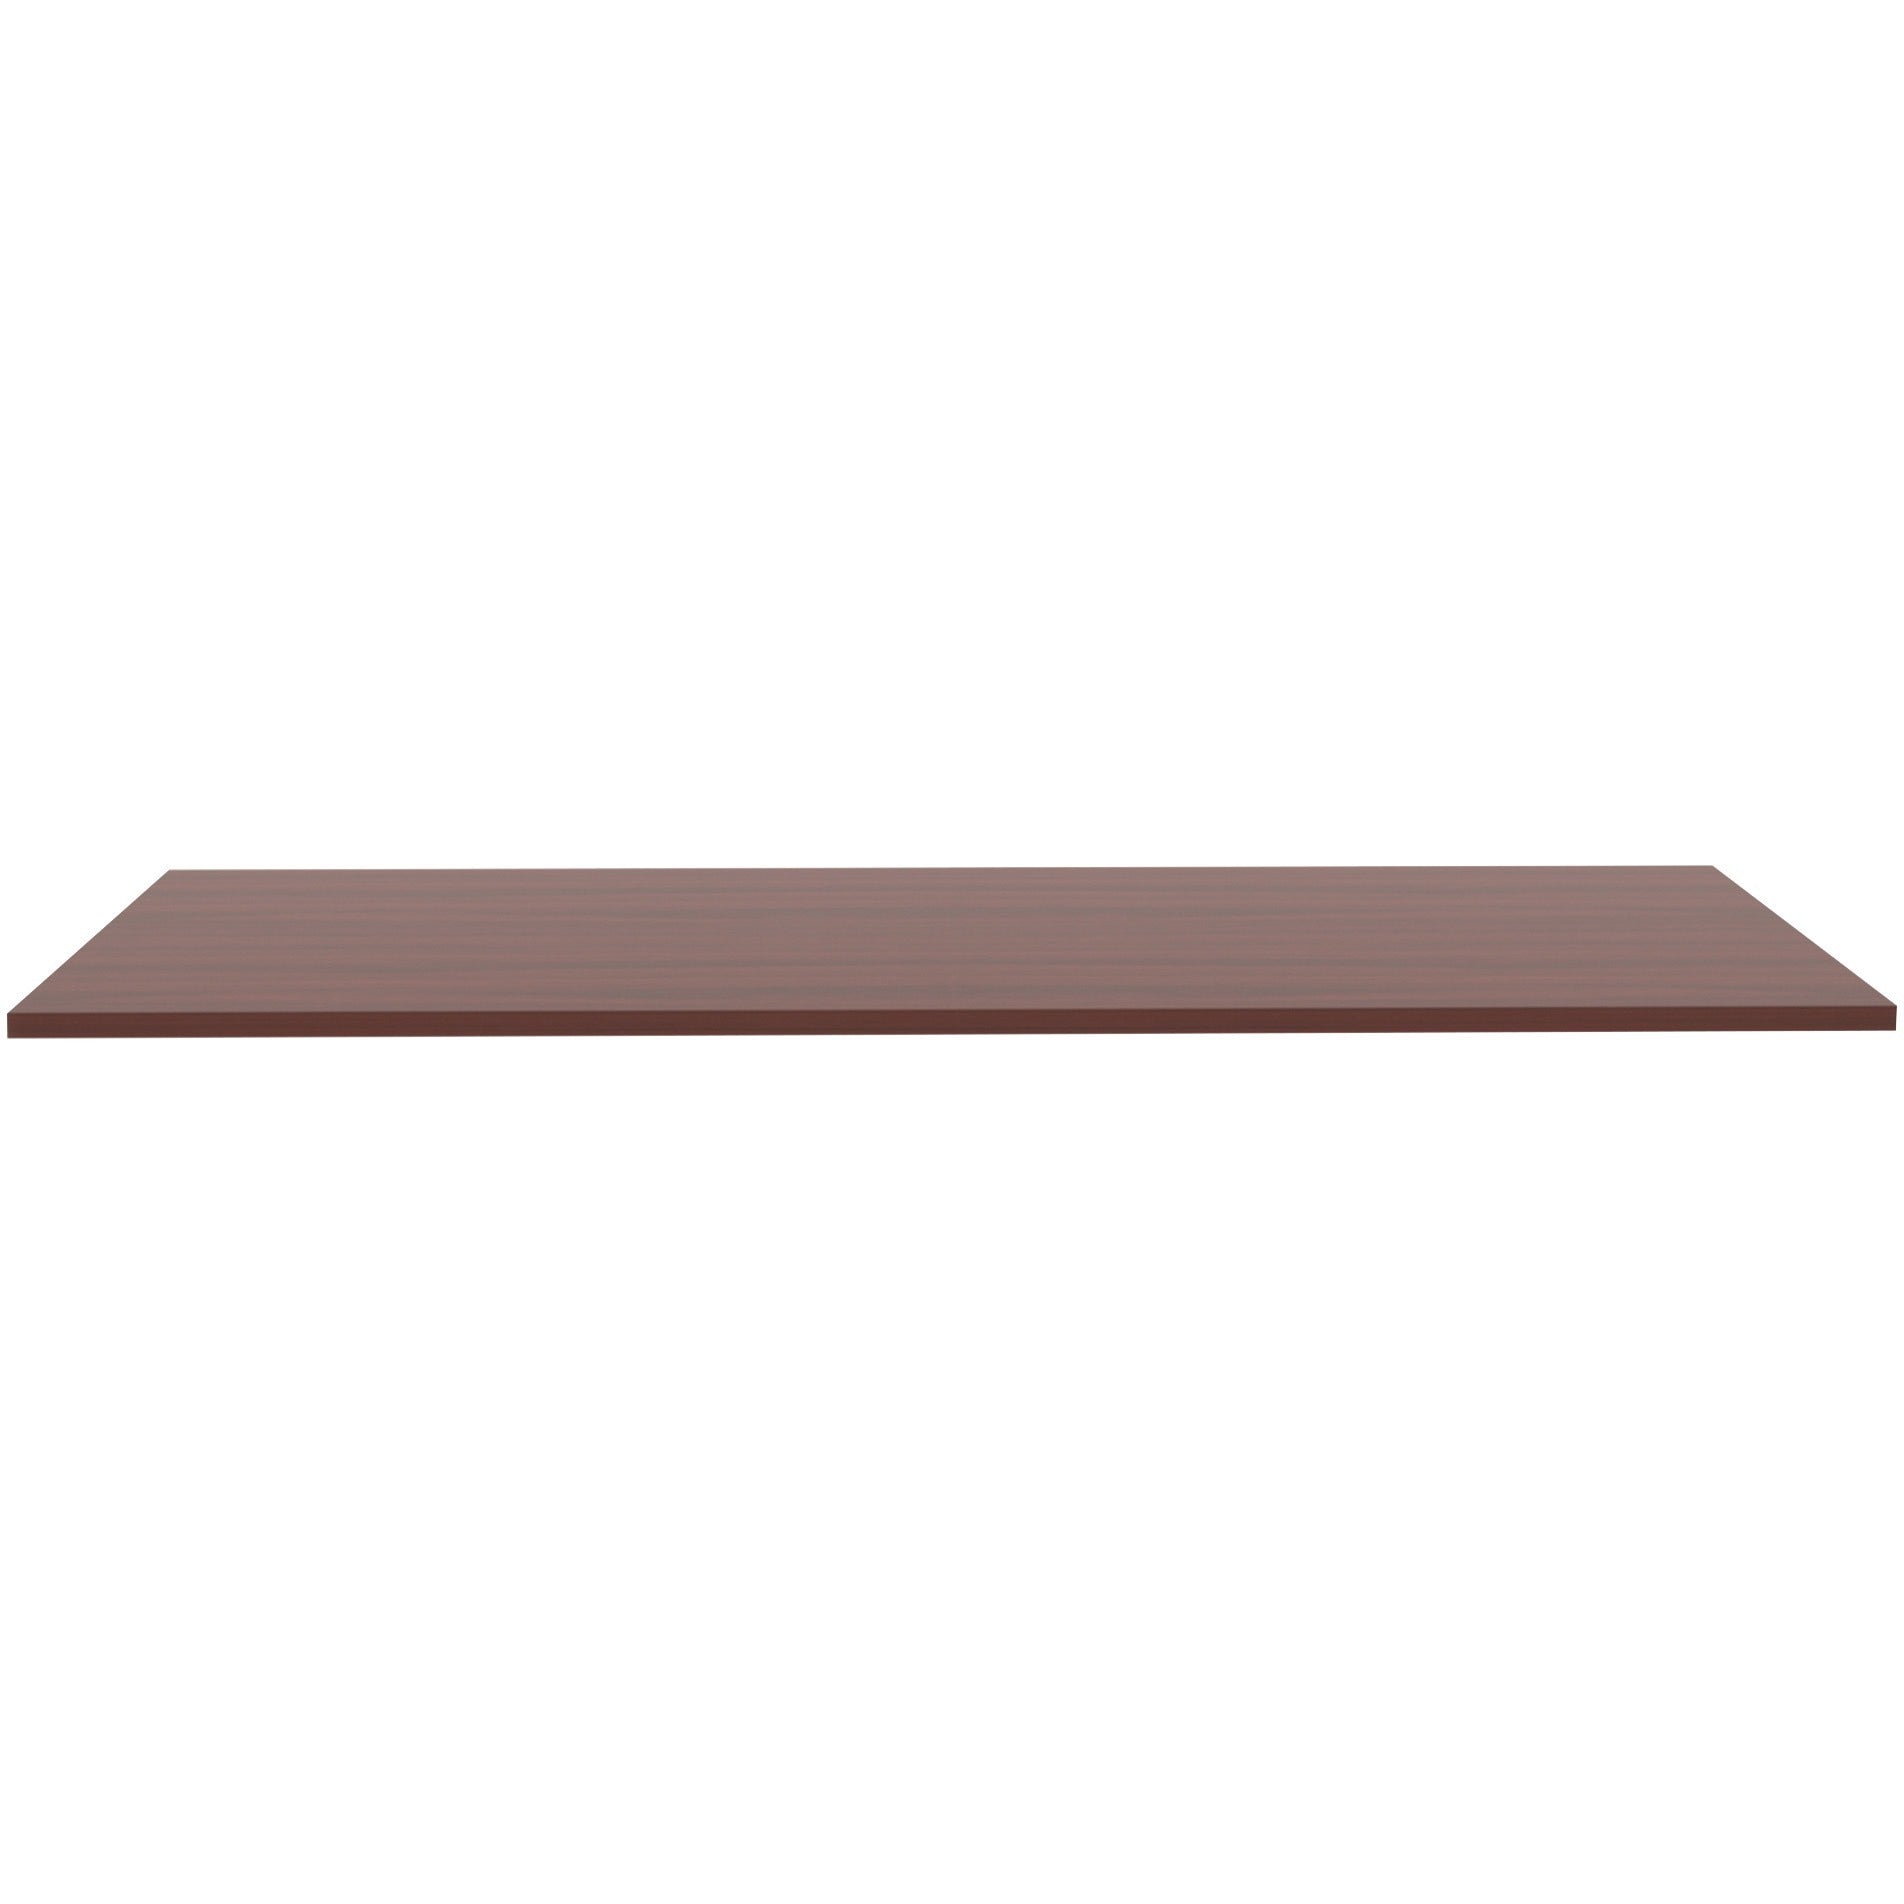 lorell-relevance-series-tabletop-for-table-toprectangle-top-contemporary-style-adjustable-height-x-72-table-top-width-x-30-table-top-depth-x-1-table-top-thickness-assembly-required-mahogany-laminated-1-each_llr34405 - 2